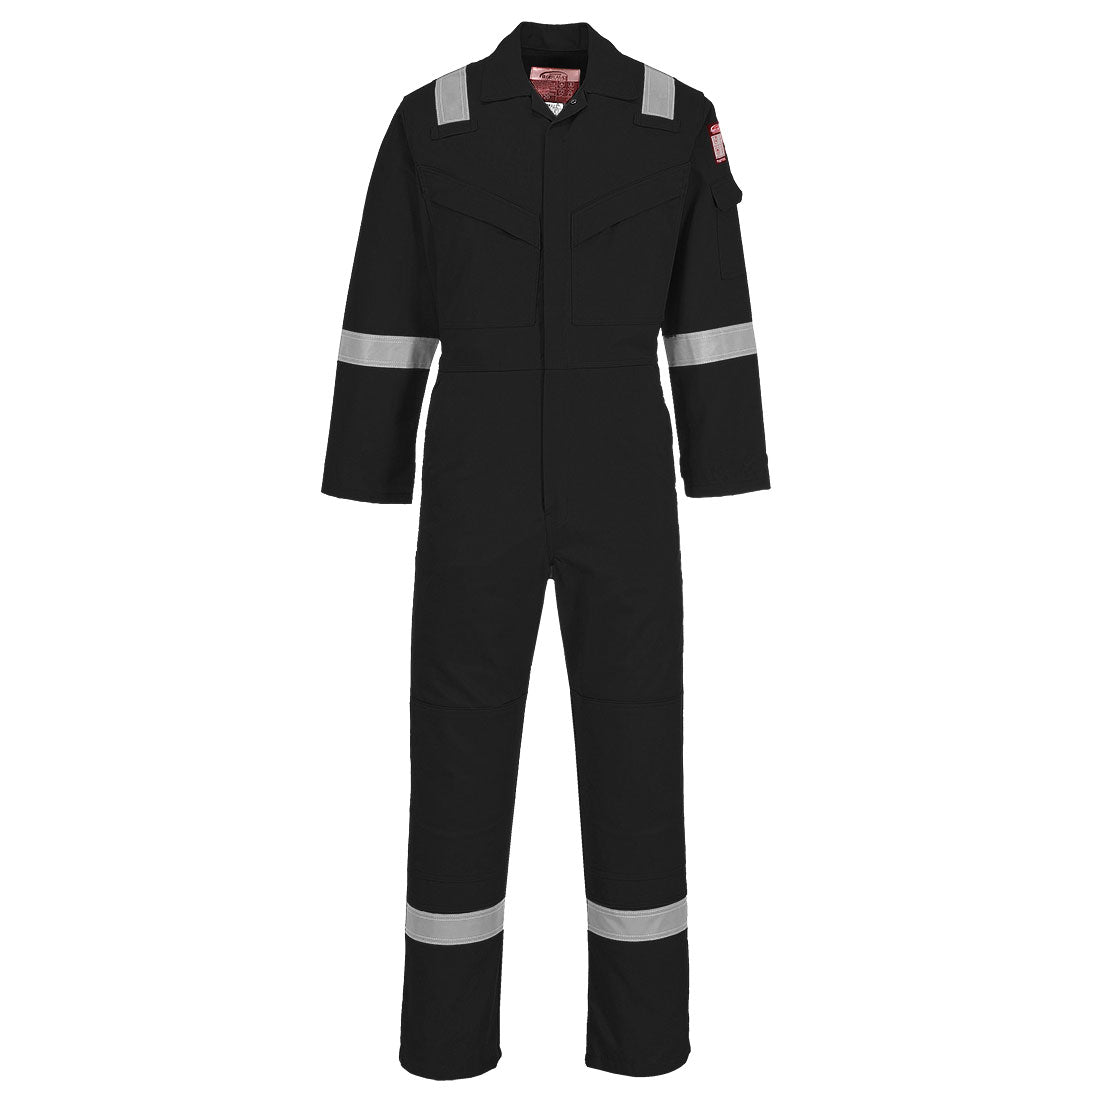 PORTWEST LIGHTWEIGHT AS COVERALL - BLACK